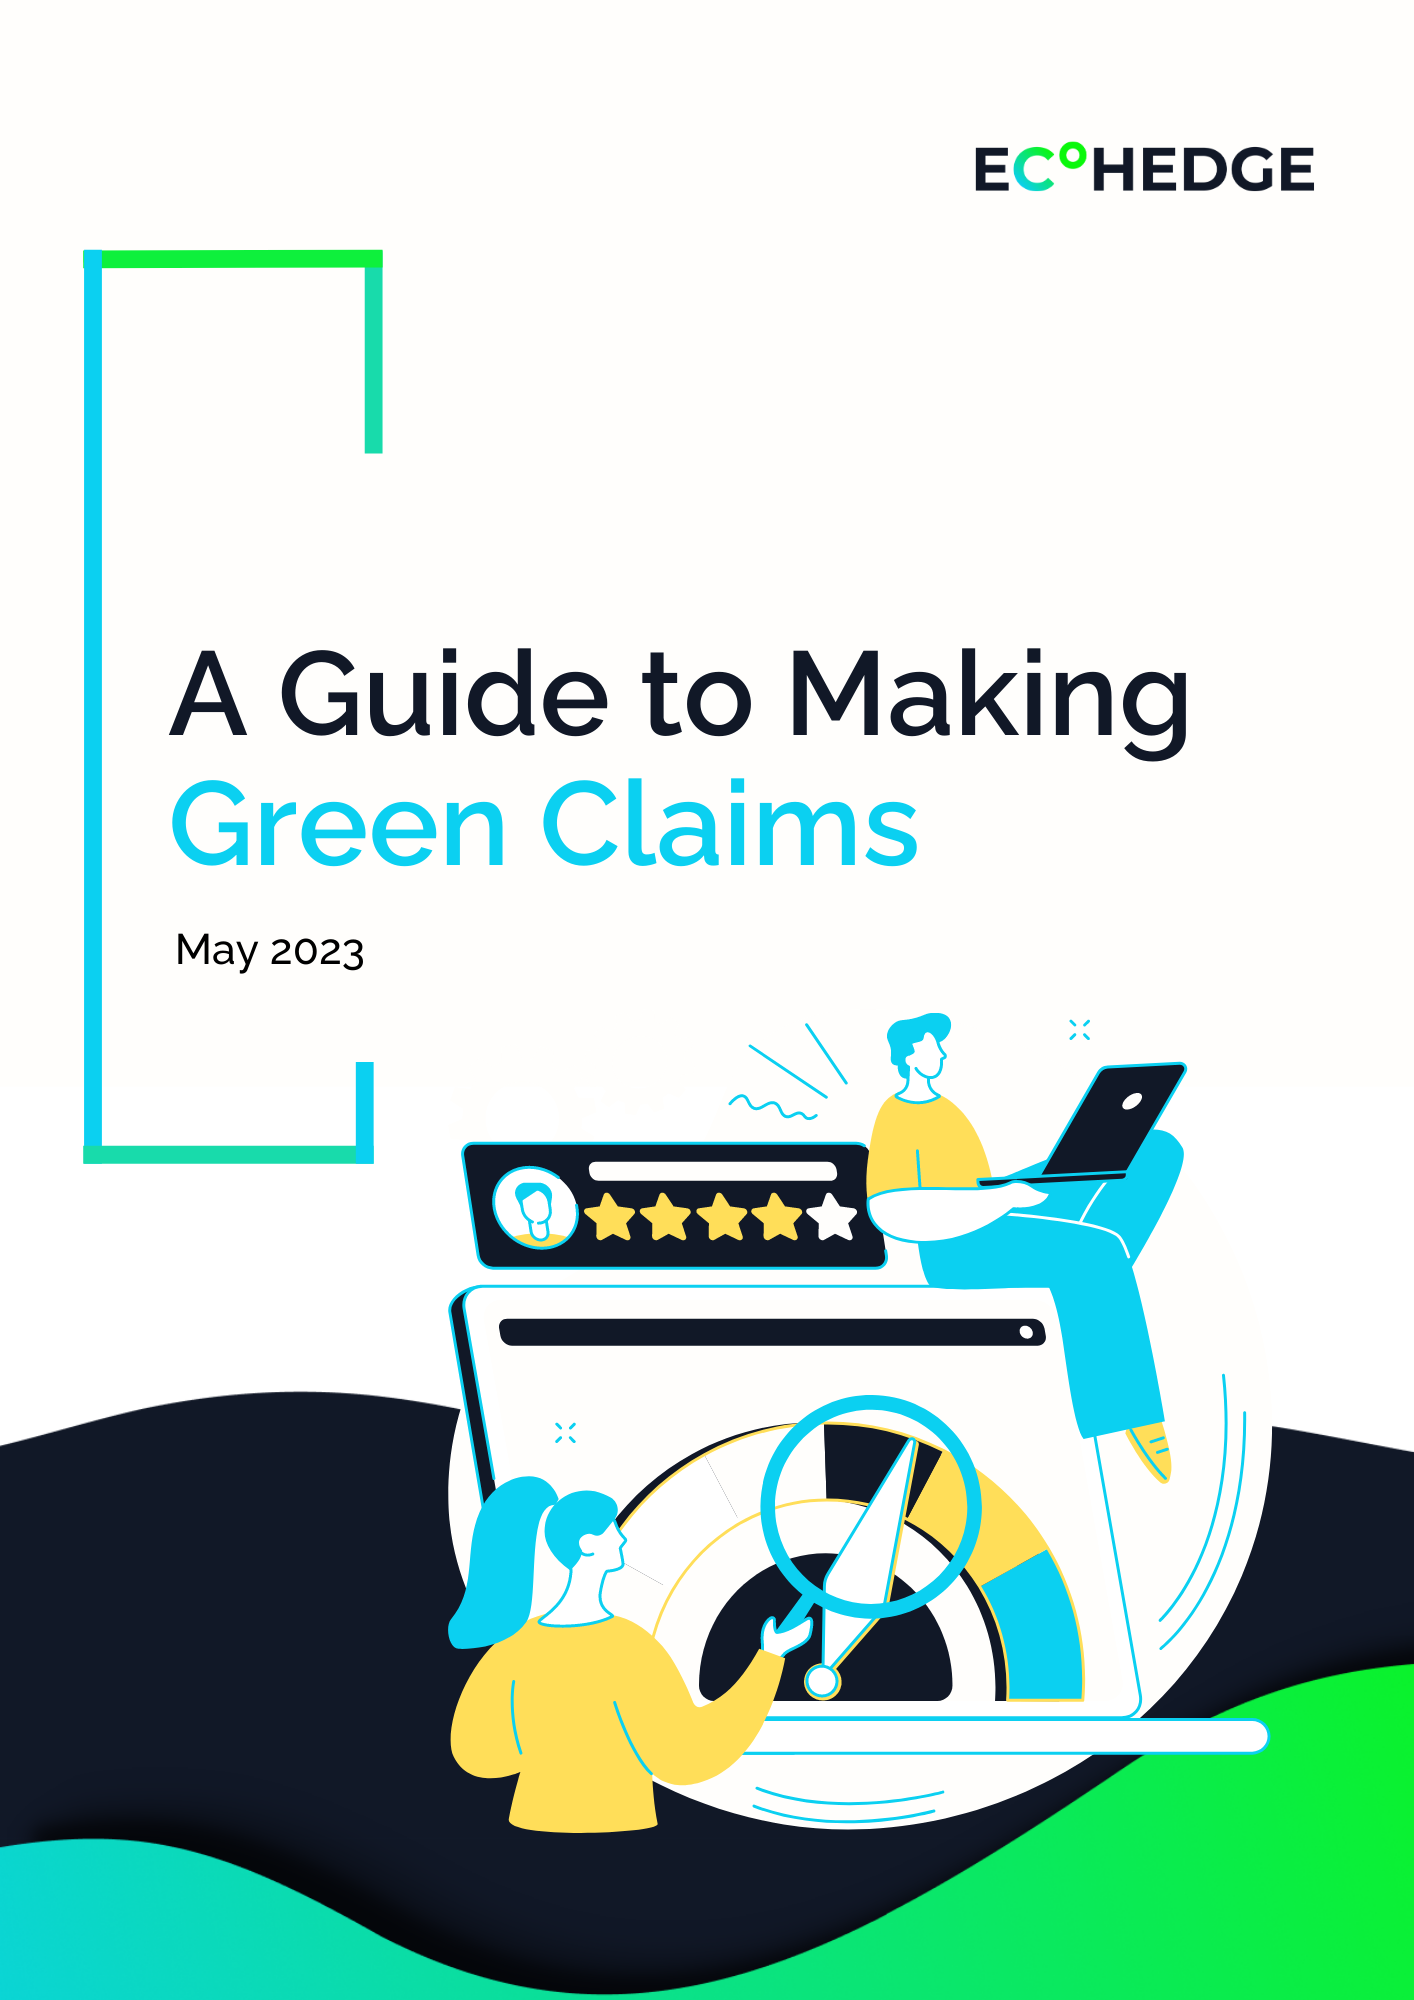 An sme's guide to green claims 